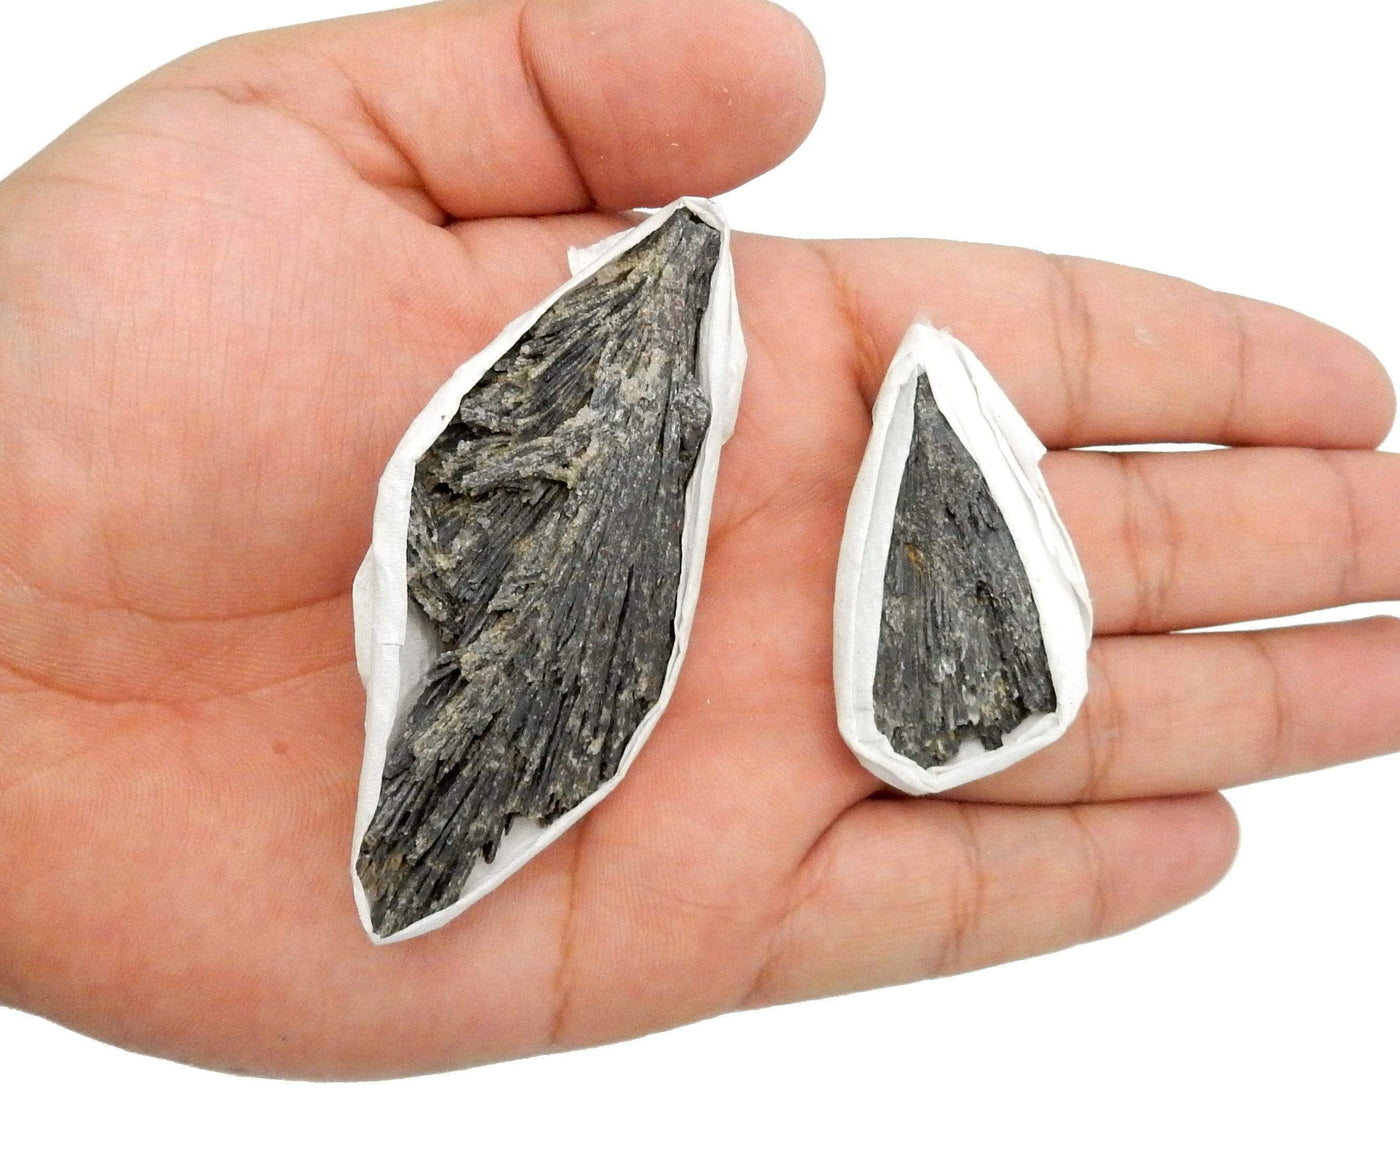 2 Black Kyanite Blades in a hand for size reference